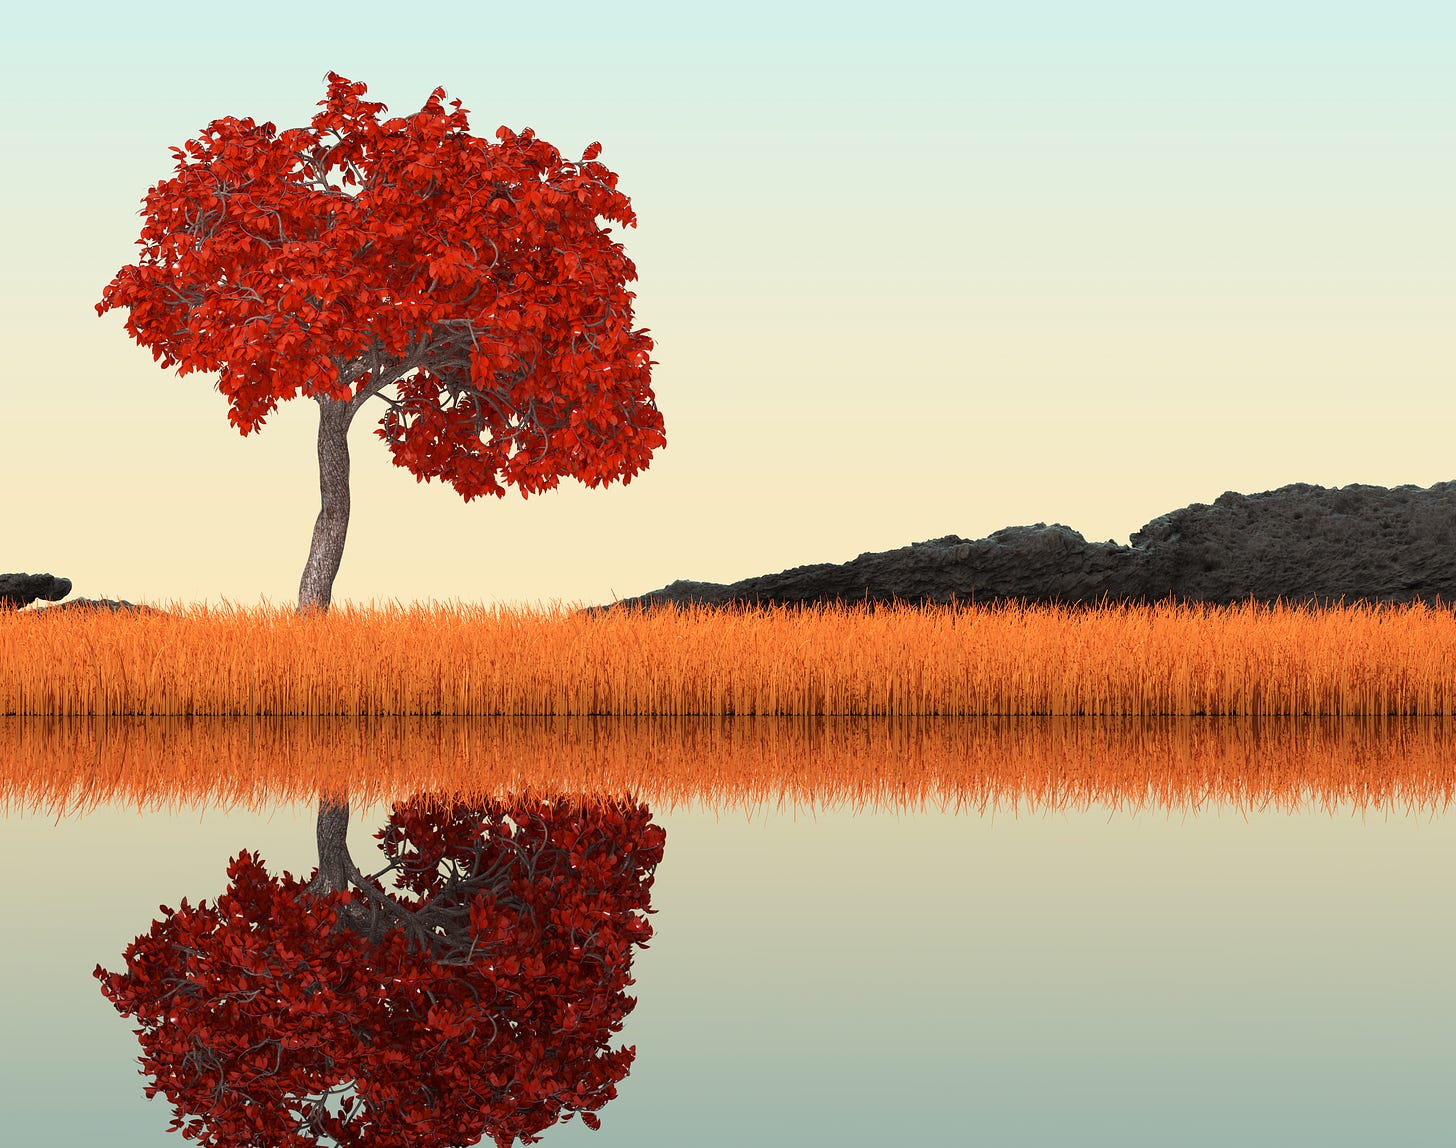 A lone red-leafed tree stands among a field of orange reeds at the edge of smooth reflective pond, while black lava hills rise shallowly in the distance under a lemony sky.